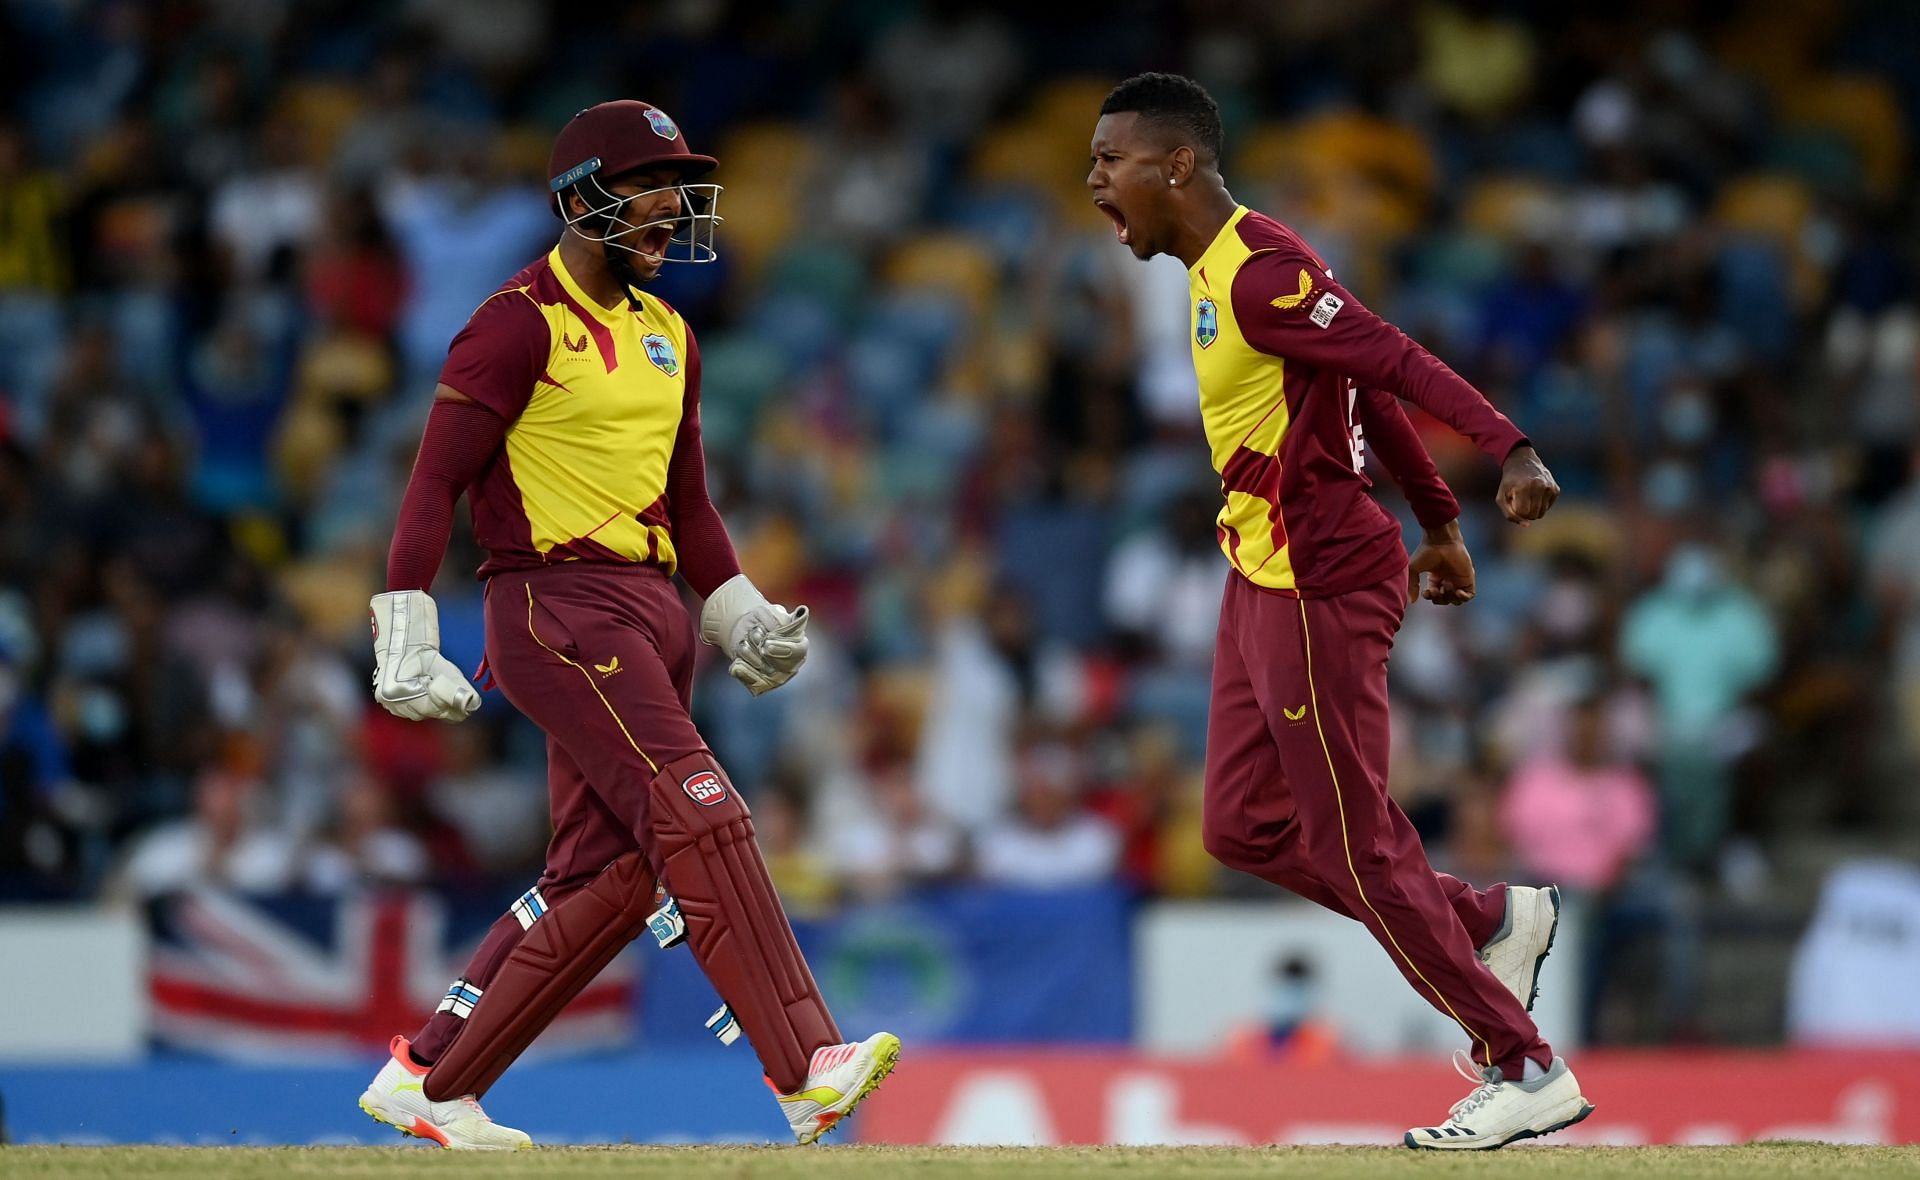 West Indies vs England - T20 International Series Fifth T20I